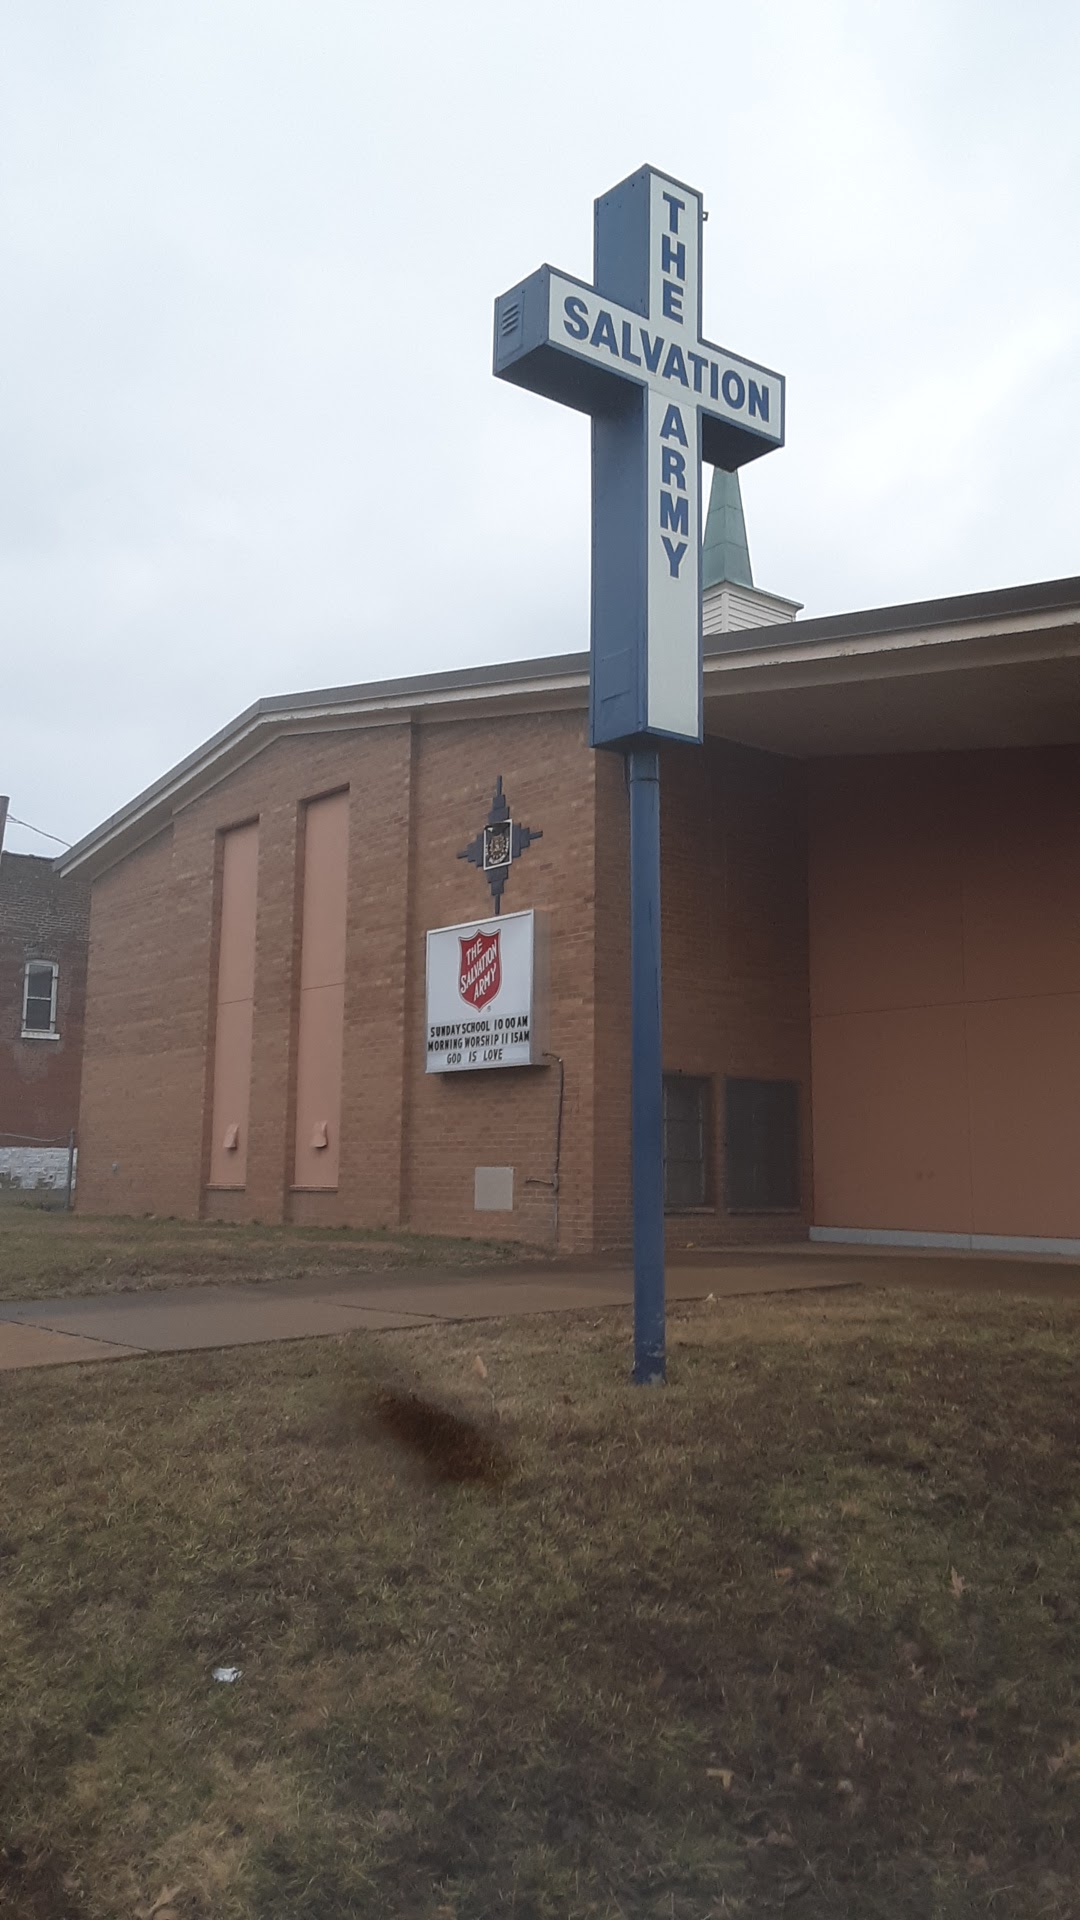 The Salvation Army St. Louis Euclid